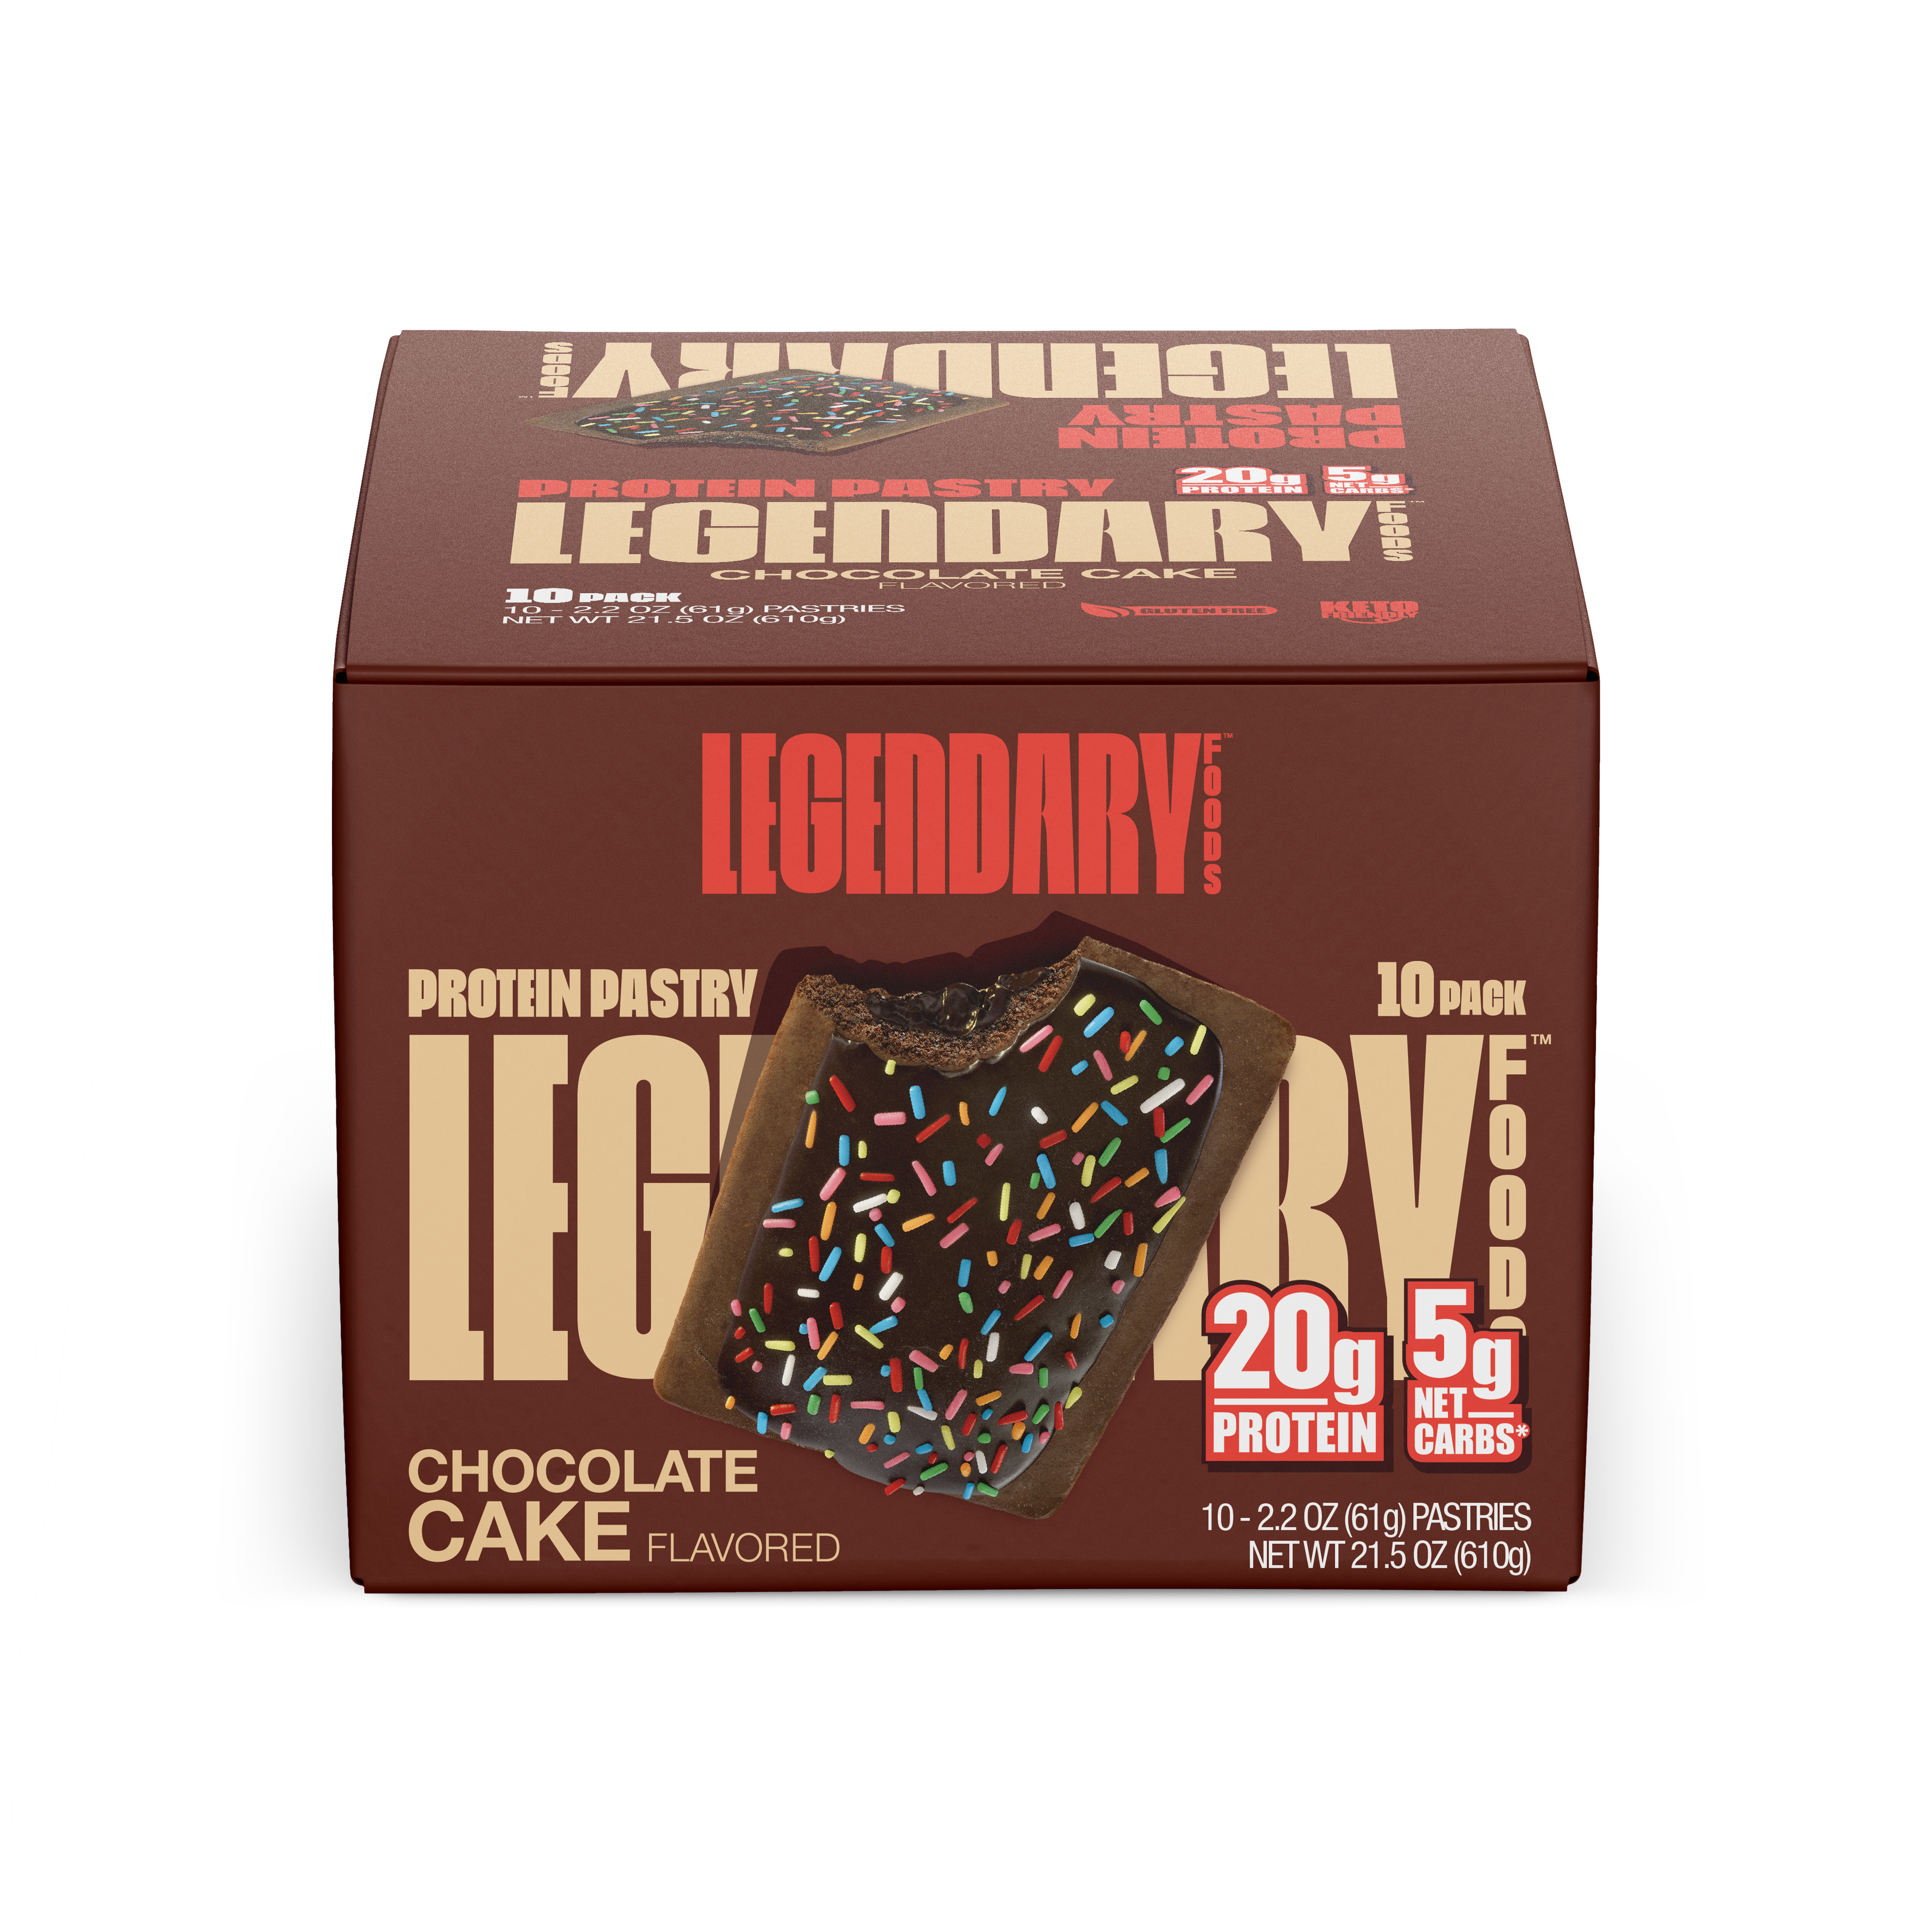 "Cake Style" Low-Carb Protein Pastry by Legendary Foods - Chocolate Cake